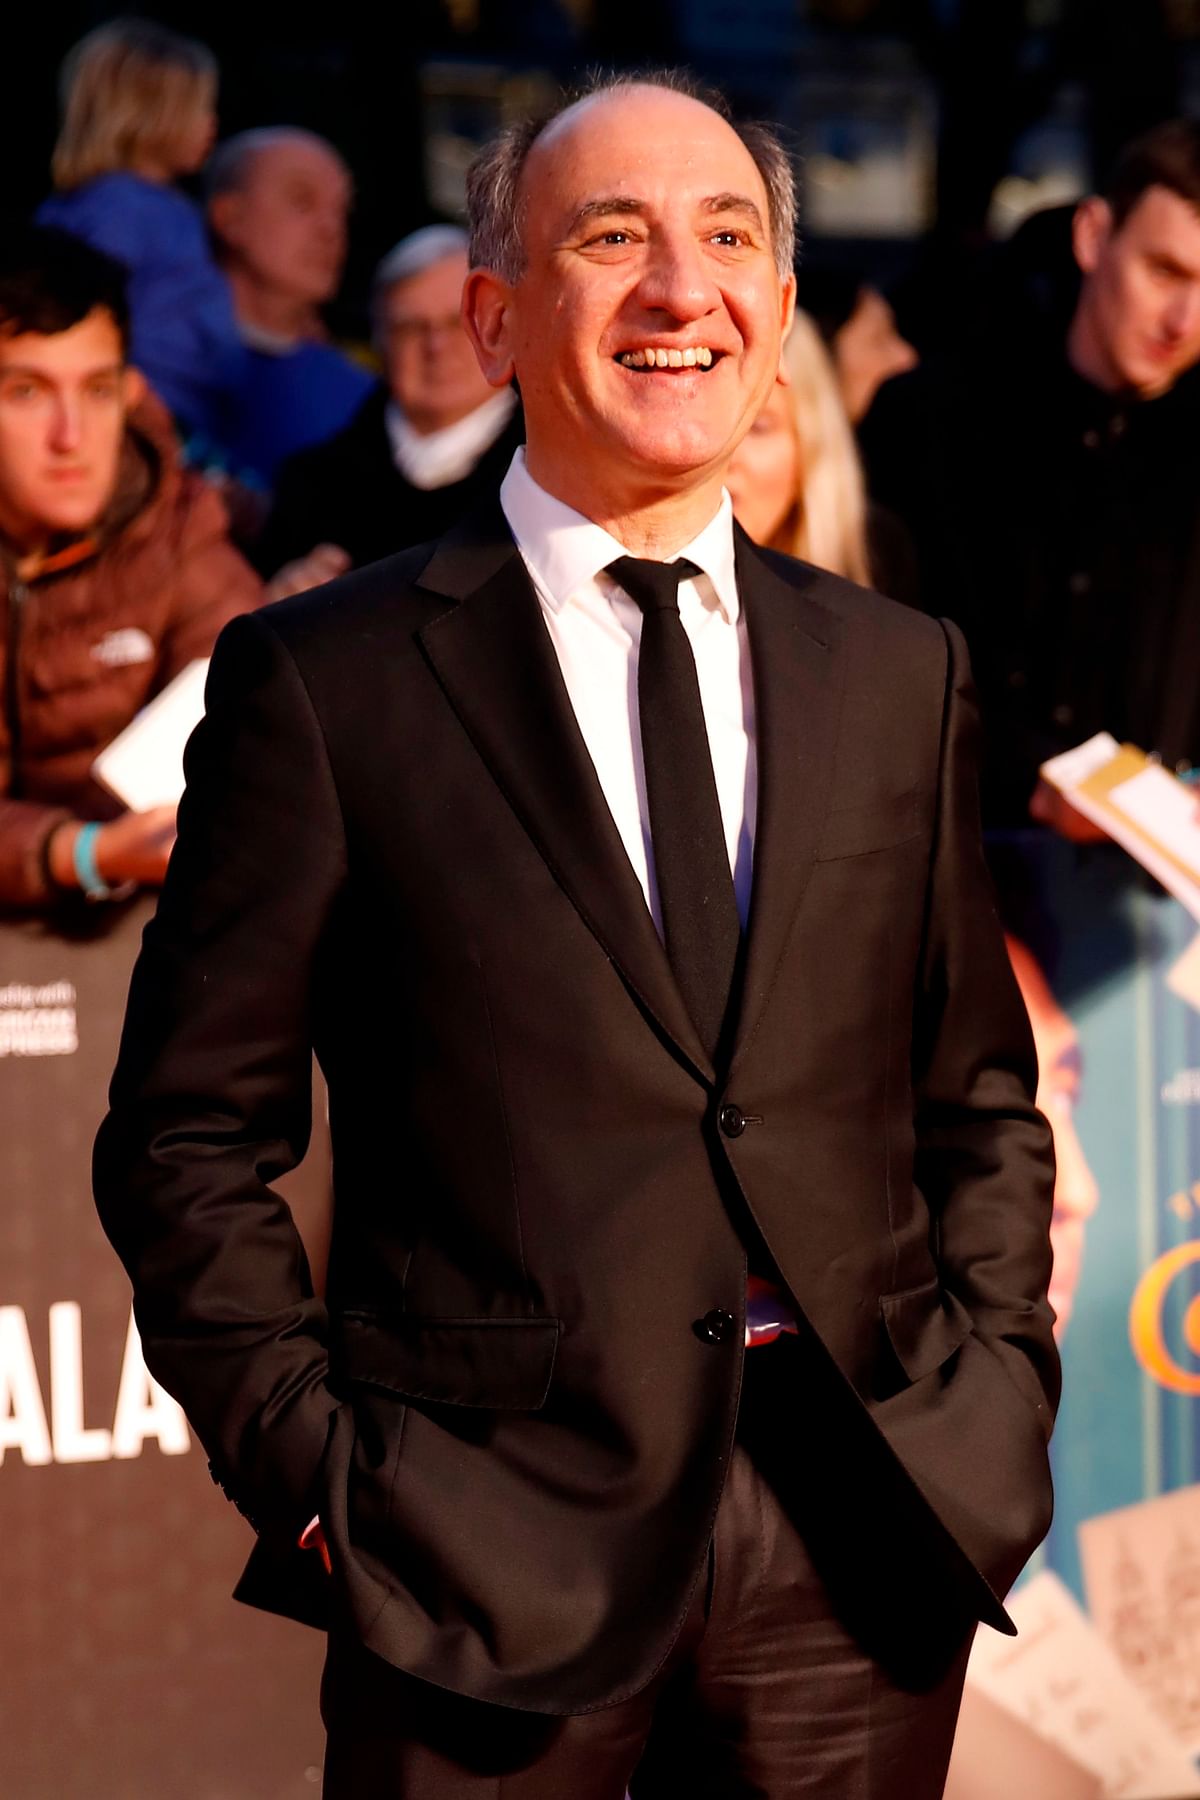 British film director Armando Iannucci poses upon arrival for the European Premiere of the film `The Personal History of David Copperfield` during the opening night gala event for the BFI London Film Festival in London on 2 October 2019. Photo: AFP